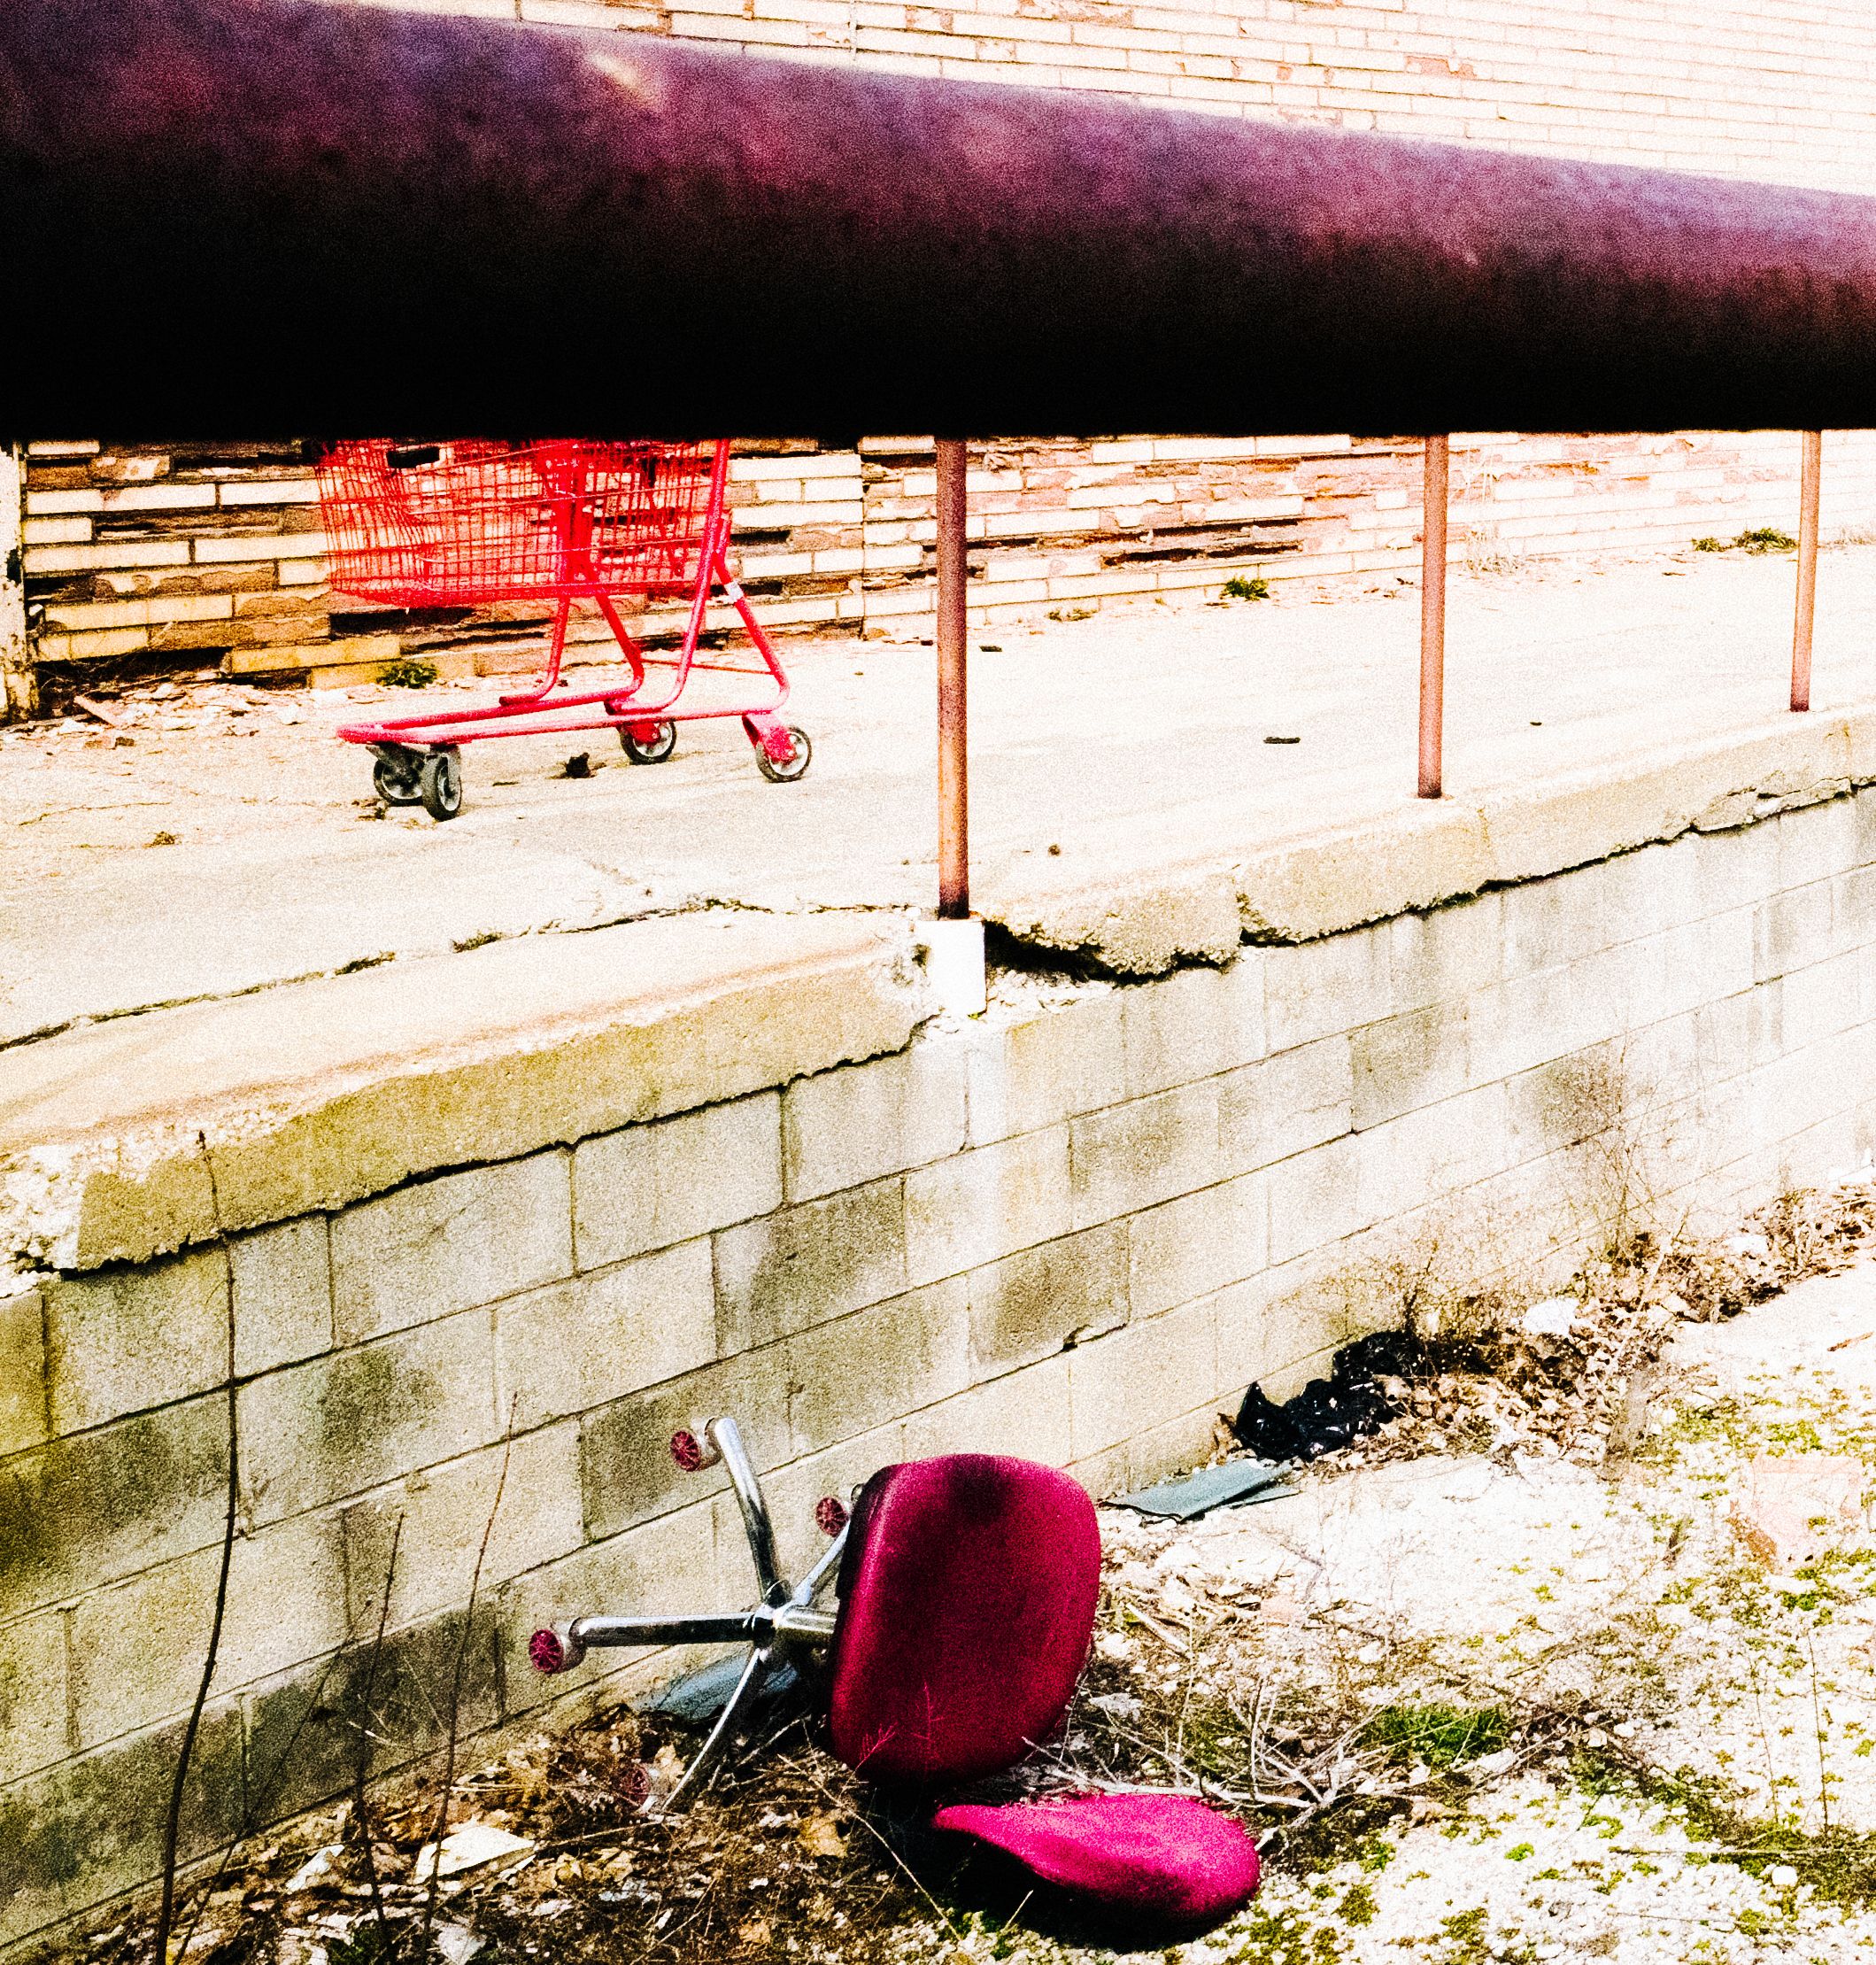 An overturned purple office chair and red shopping cart in a deserted parking lot